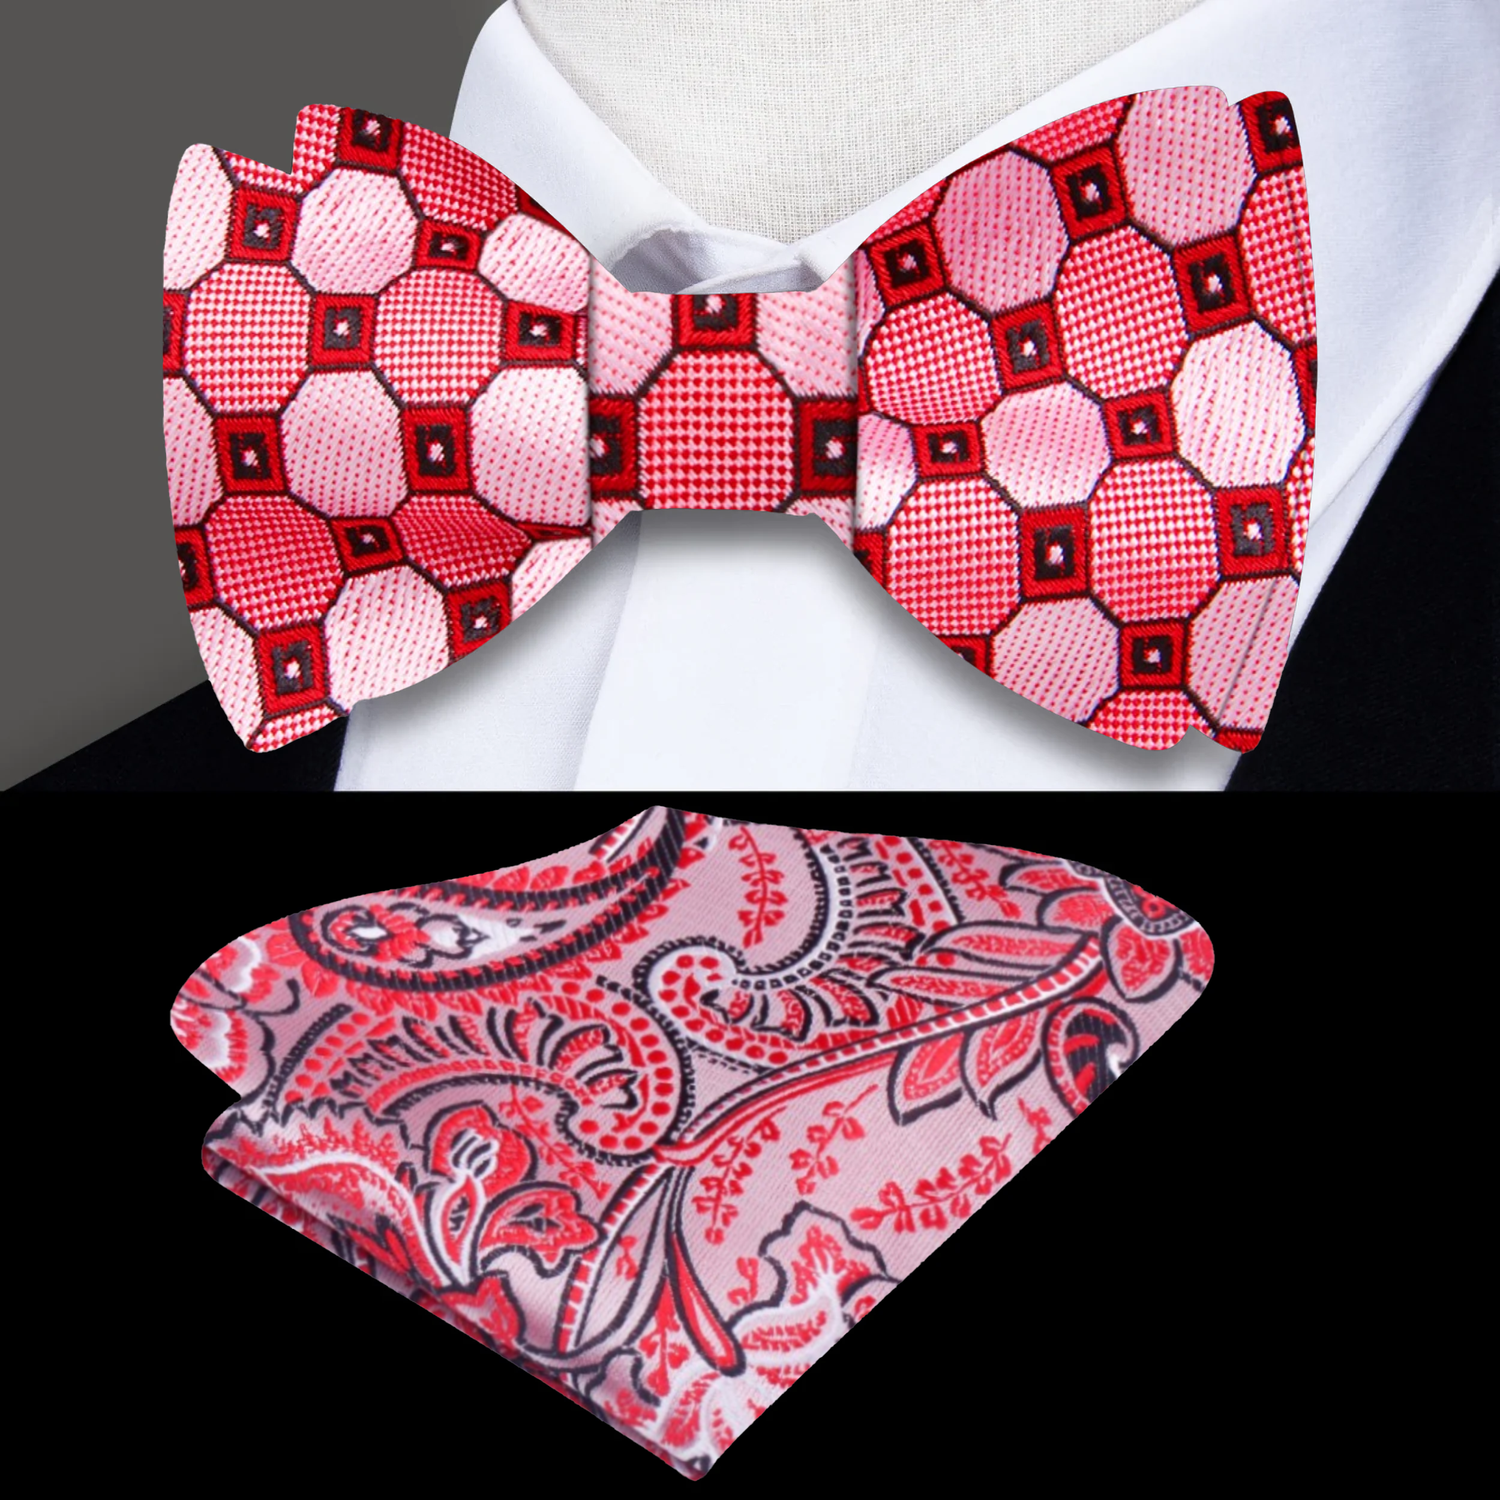 A Red, Pink Geometric Pattern Silk Self Tie Bow Tie, Accenting Pocket Square